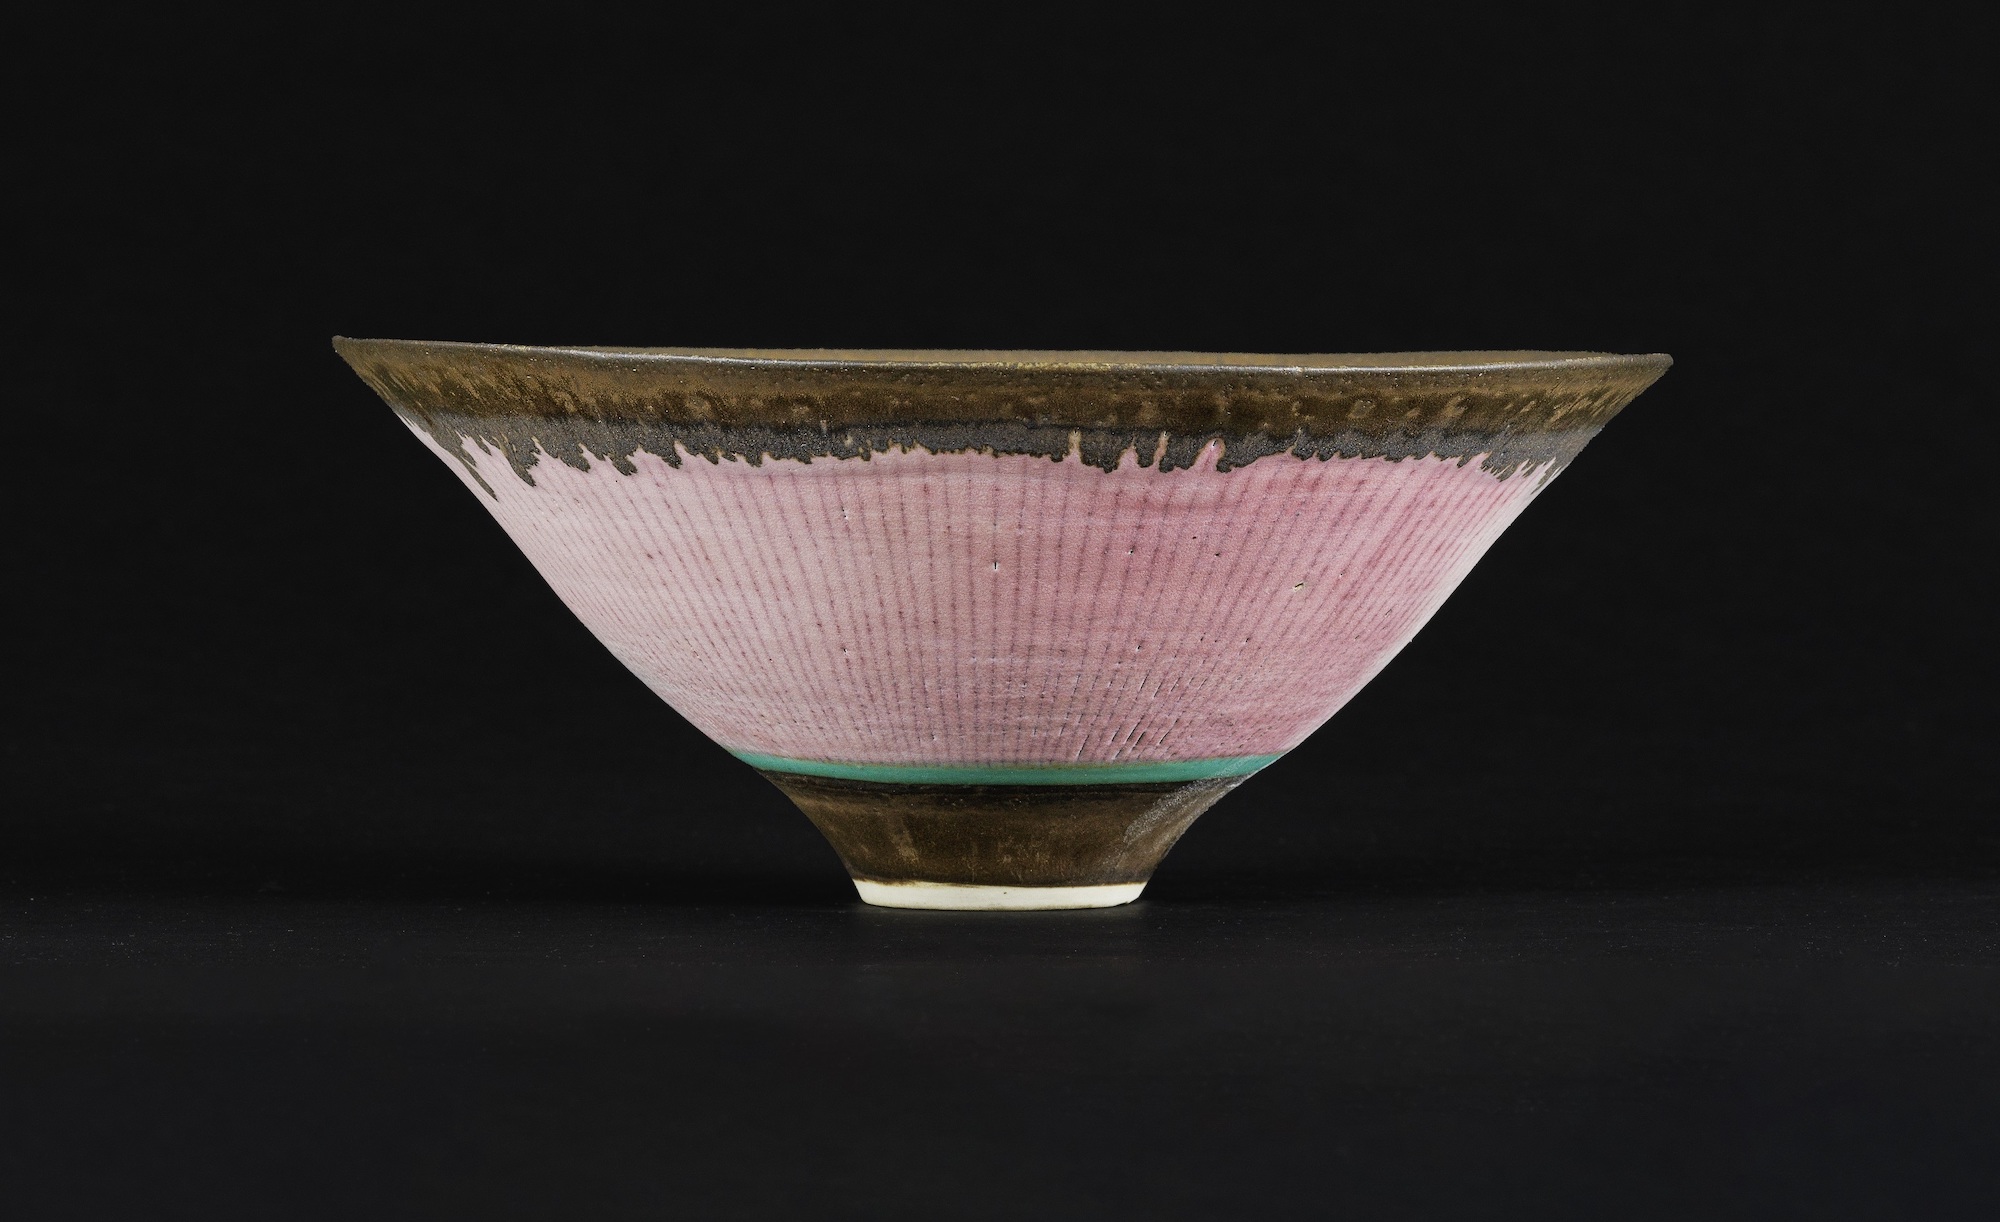 A stunning rose-coloured footed bowl by Lucie Rie, circa 1980